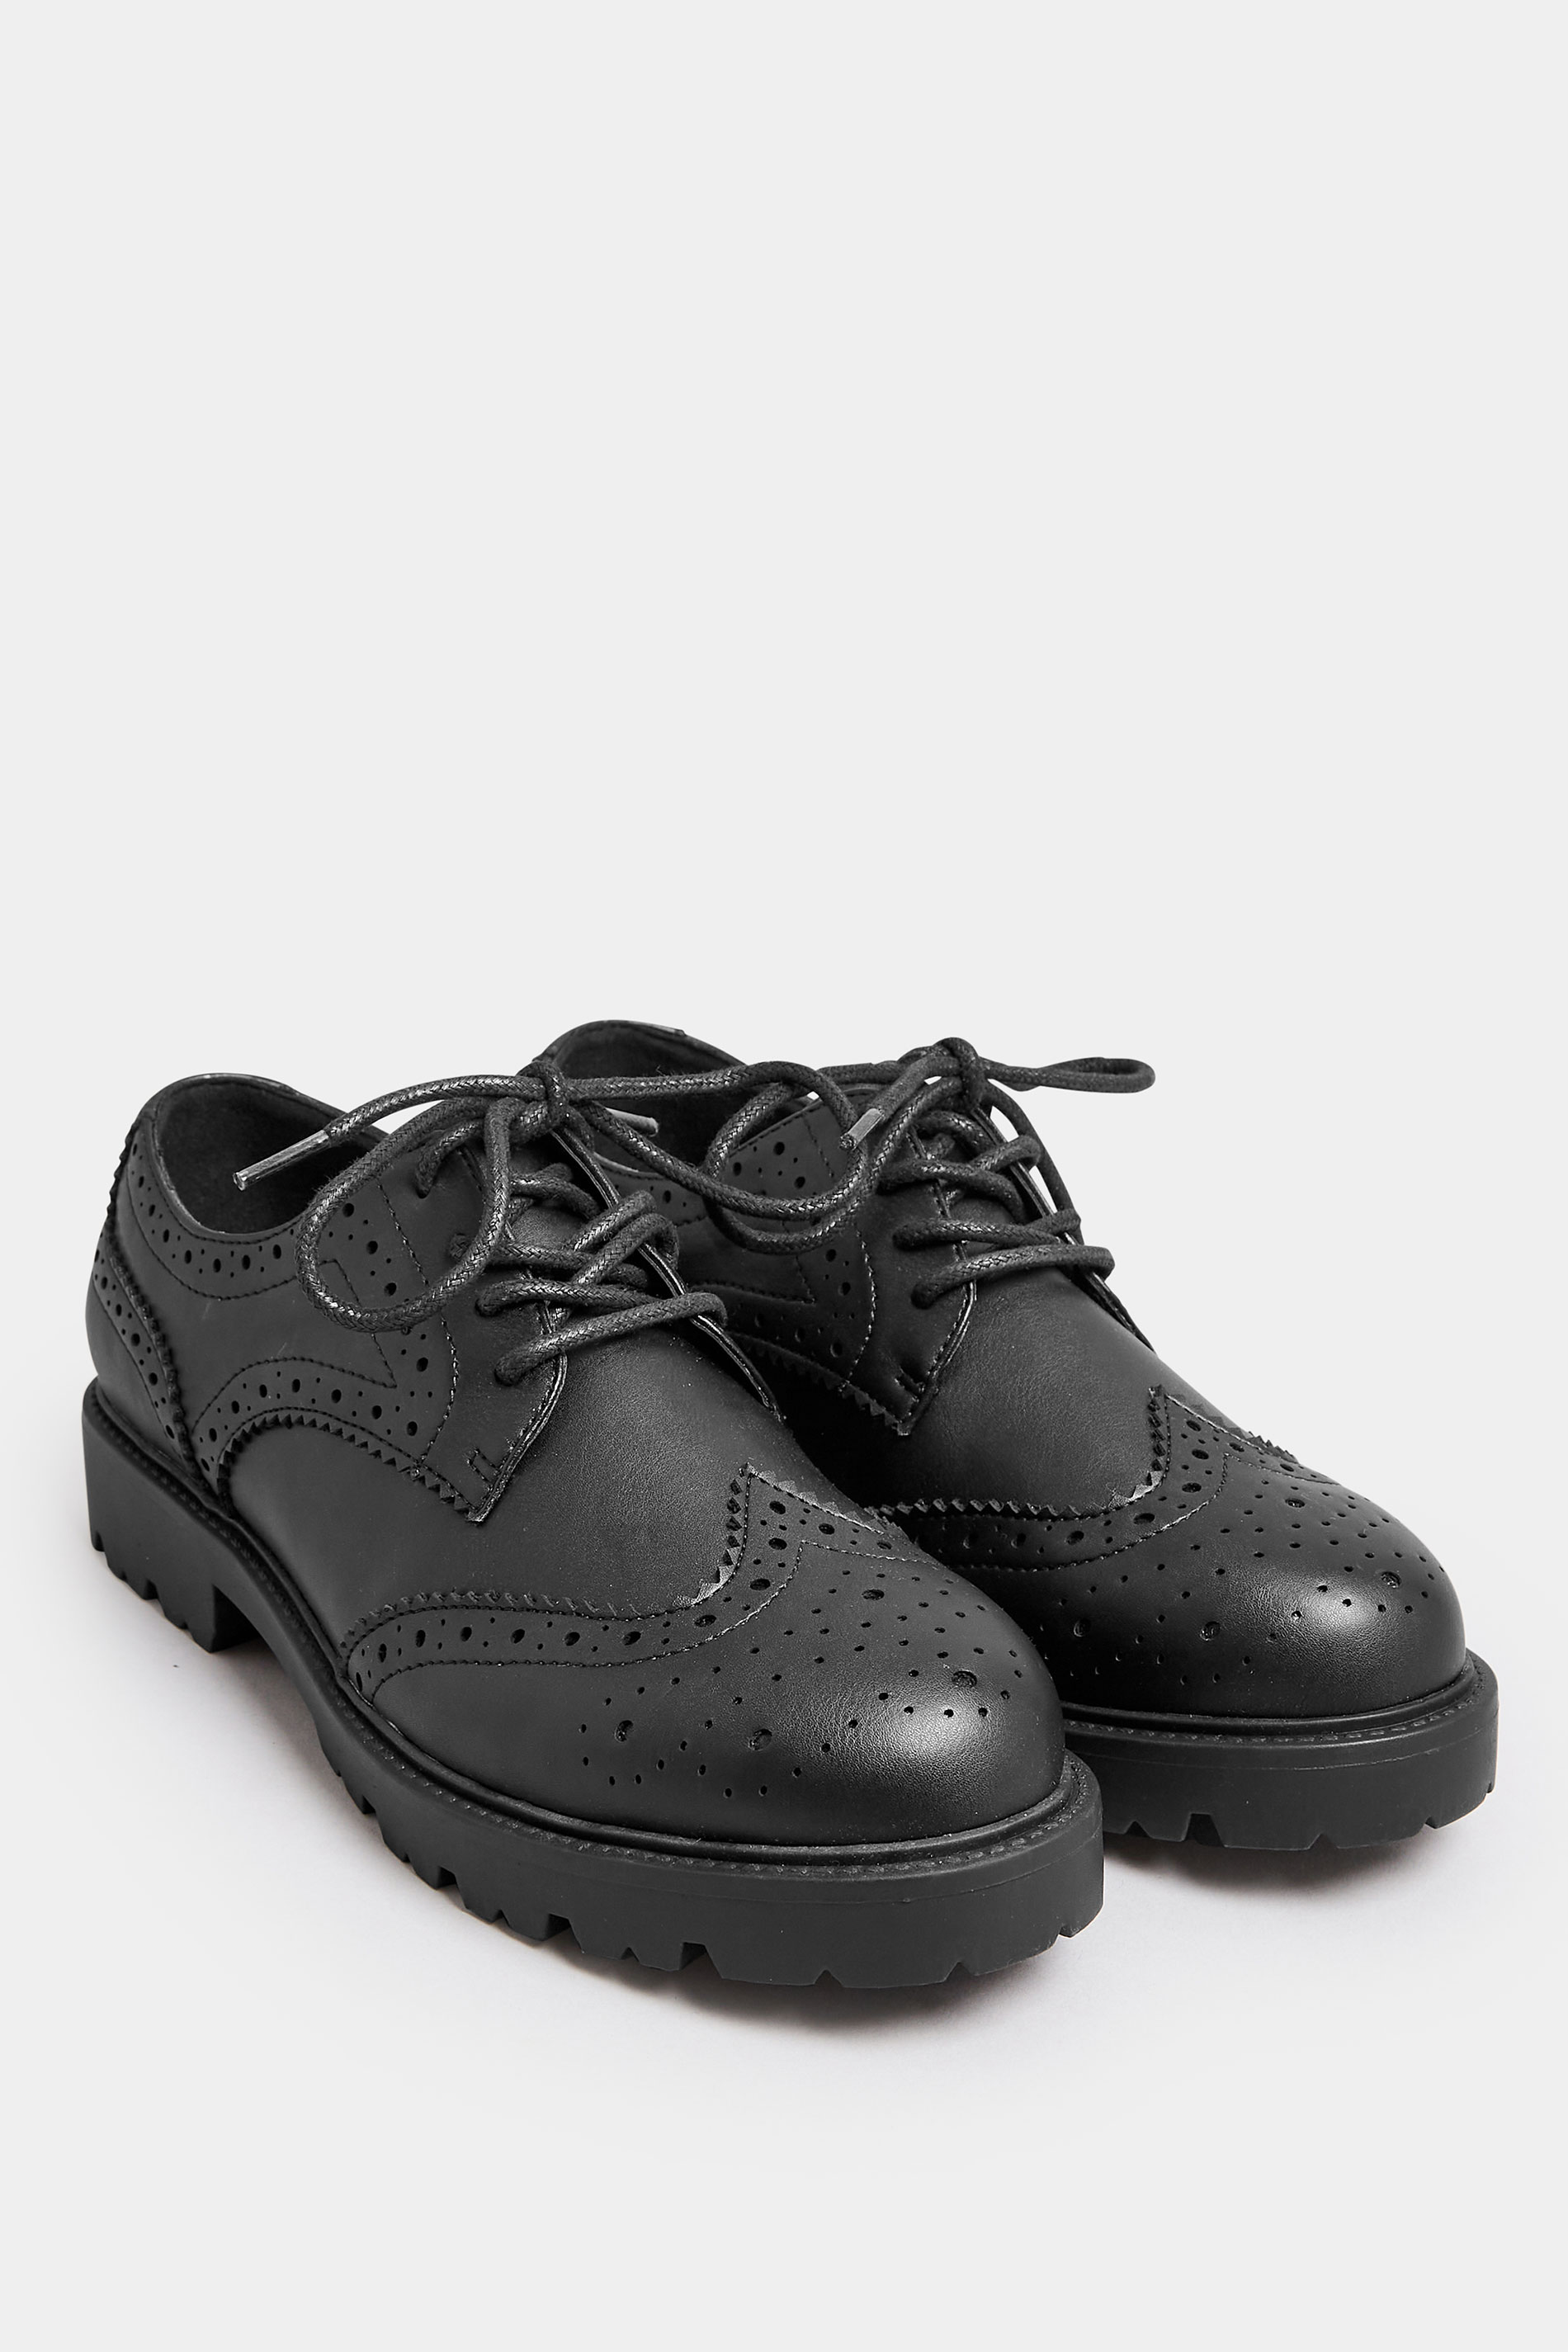 Black Brogue Derby Shoes In Wide E Fit & Extra Wide EEE Fit | Yours Clothing 2